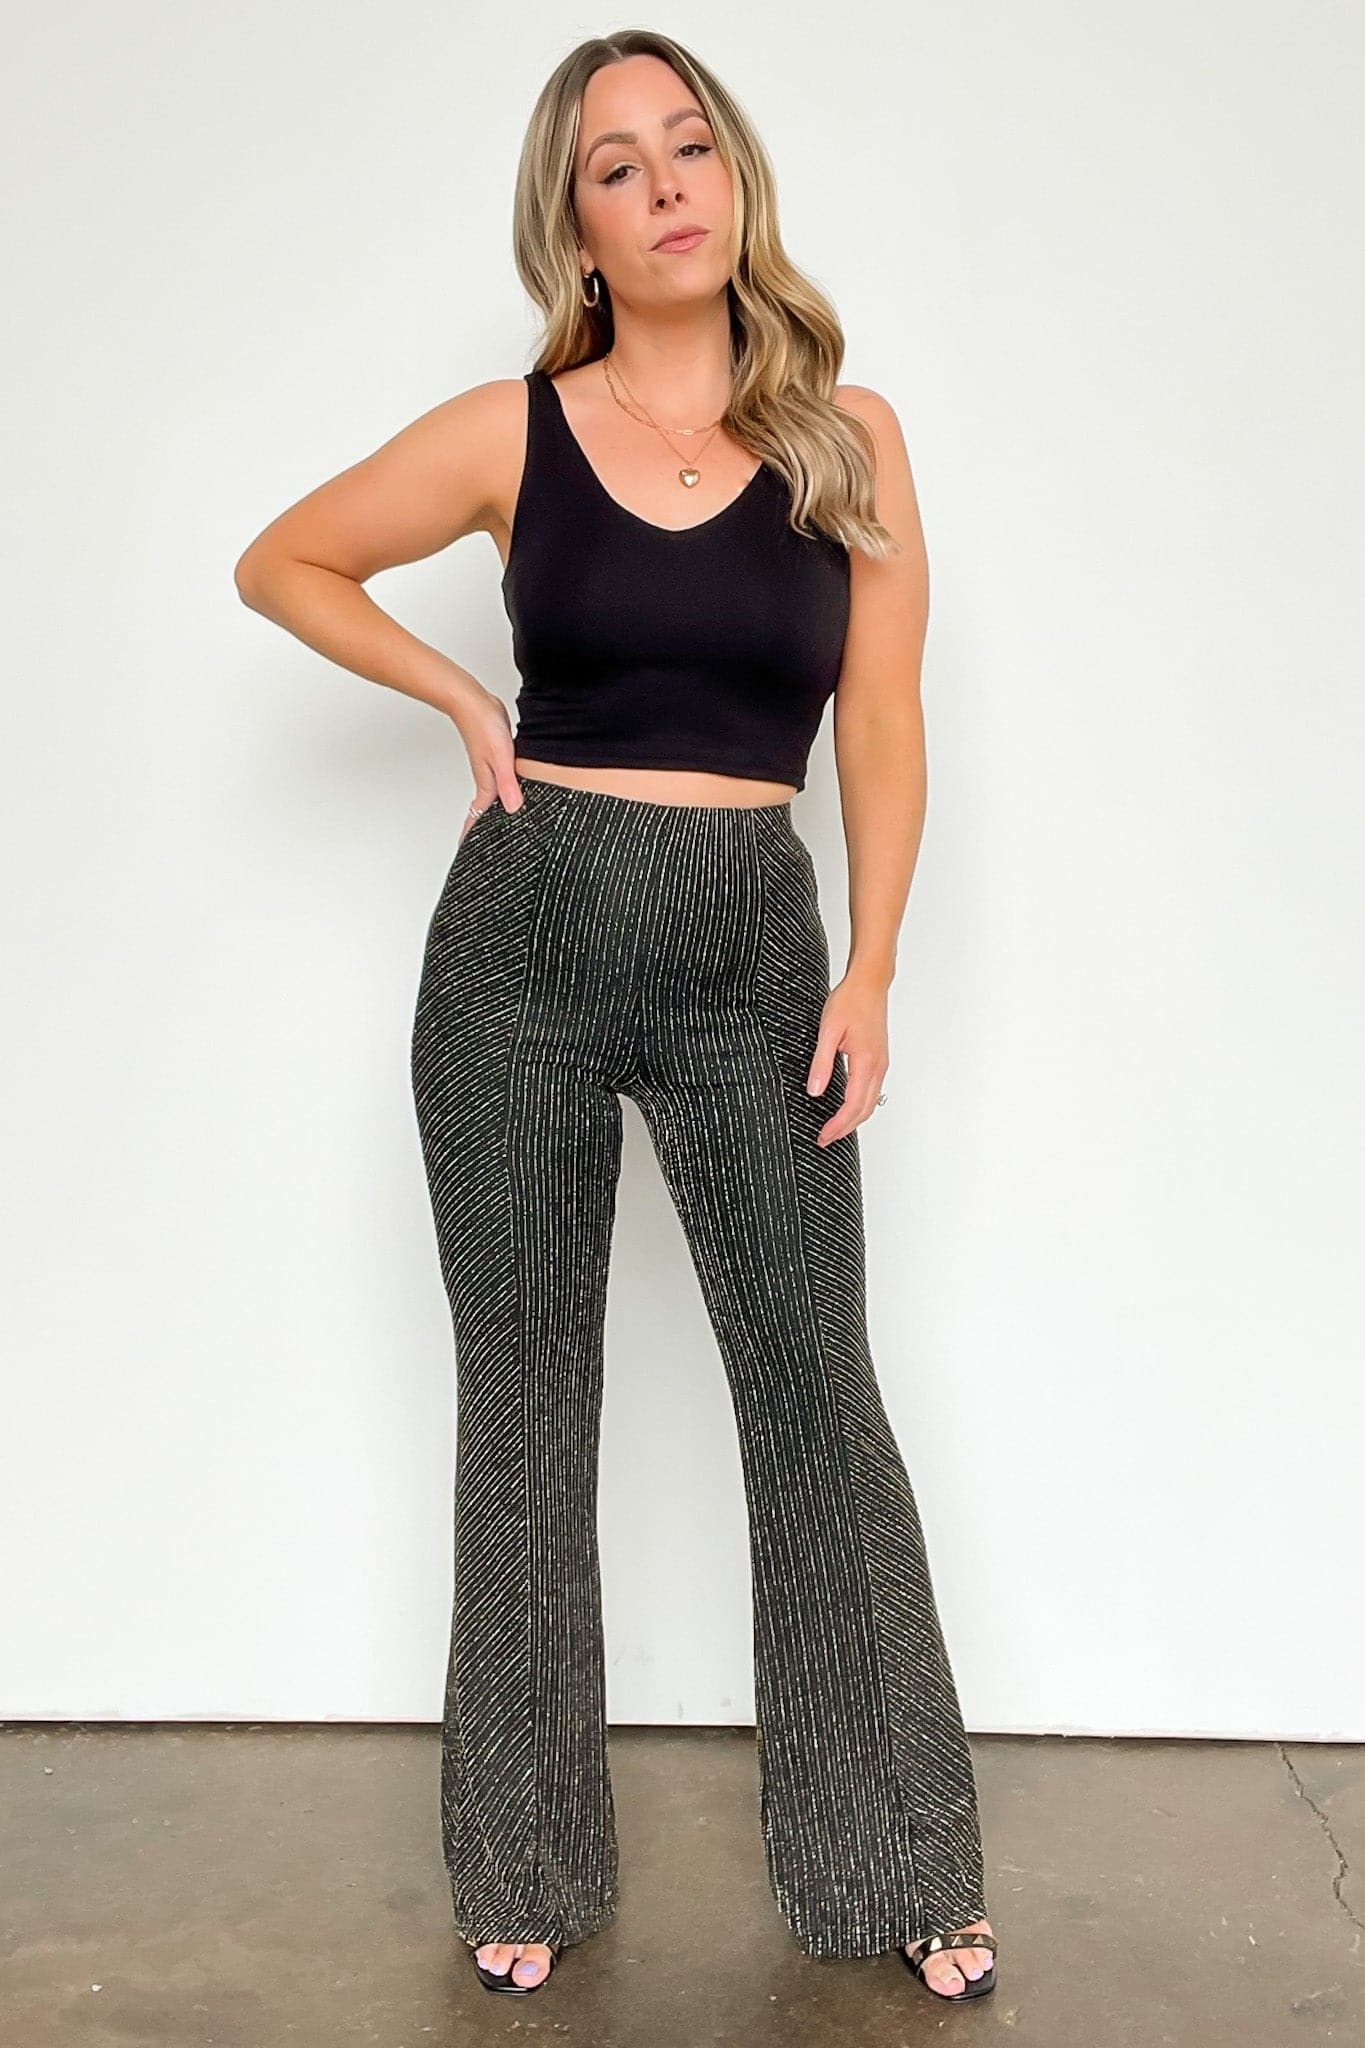  Midnight Moves Lurex High Waist Pants - FINAL SALE - Madison and Mallory